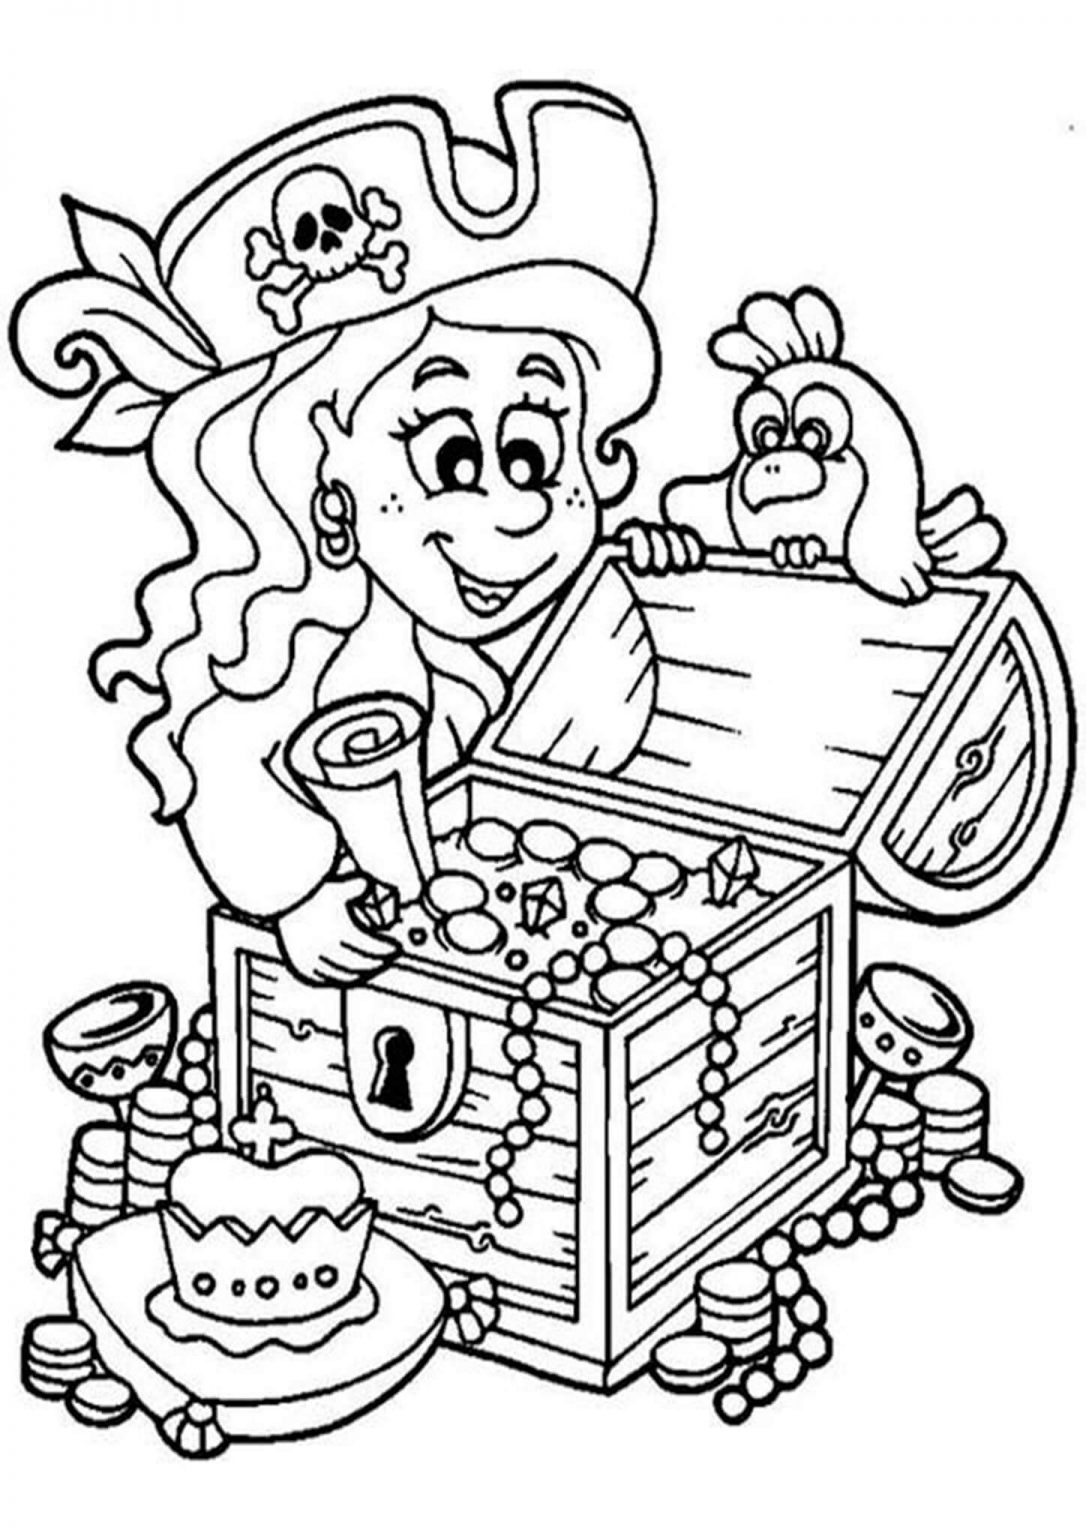 Free Printable Pirate Coloring Pages Free Printable Templates